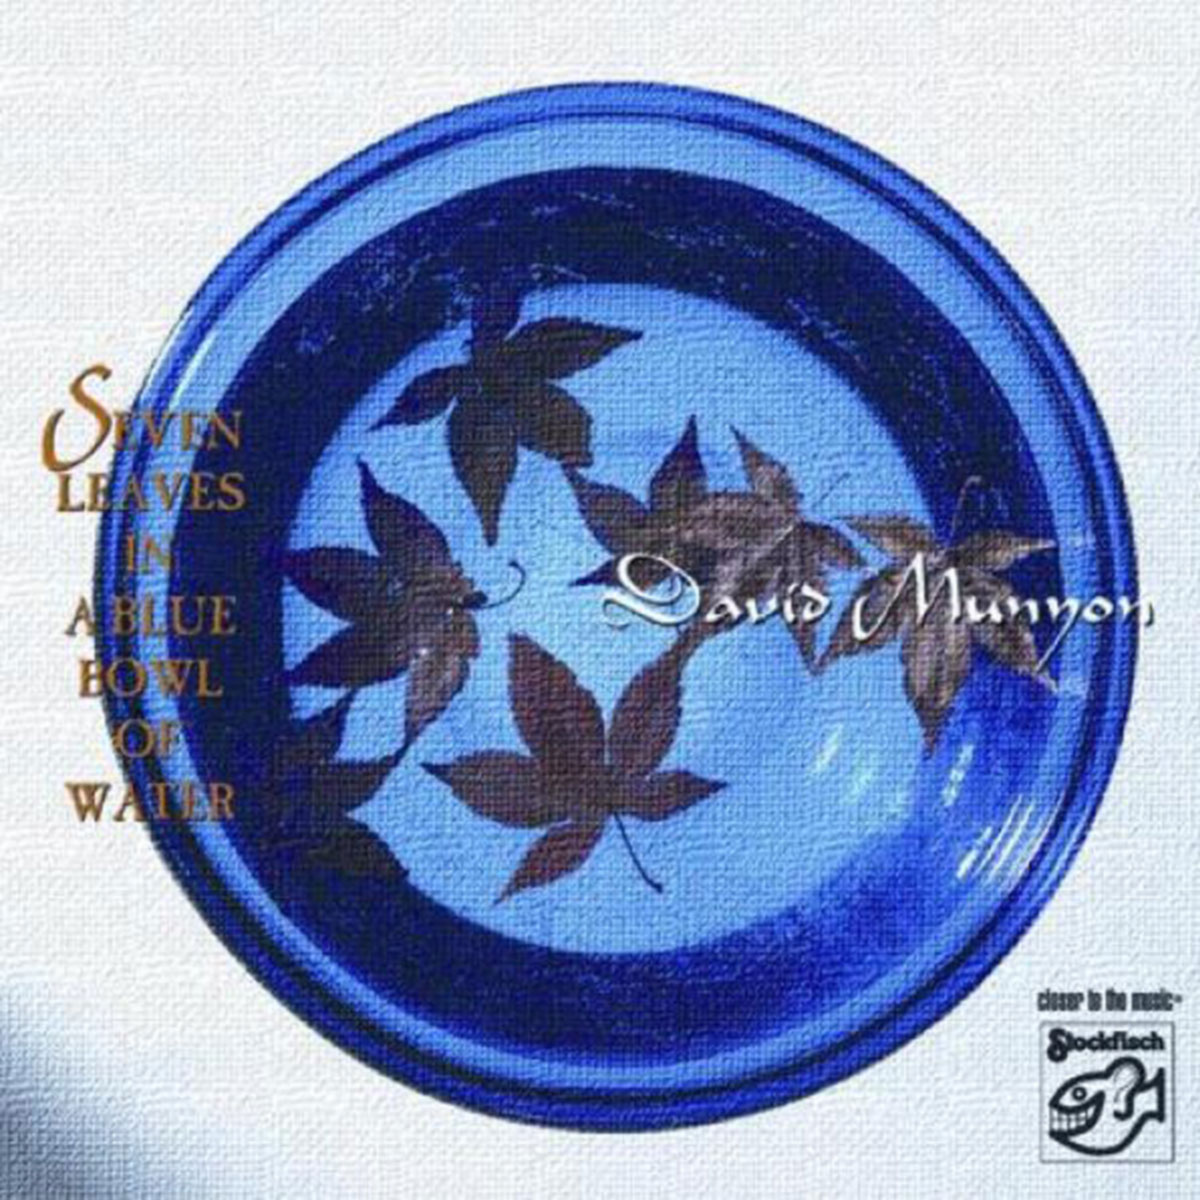 Seven Leaves In A Blue Bowl Of Water